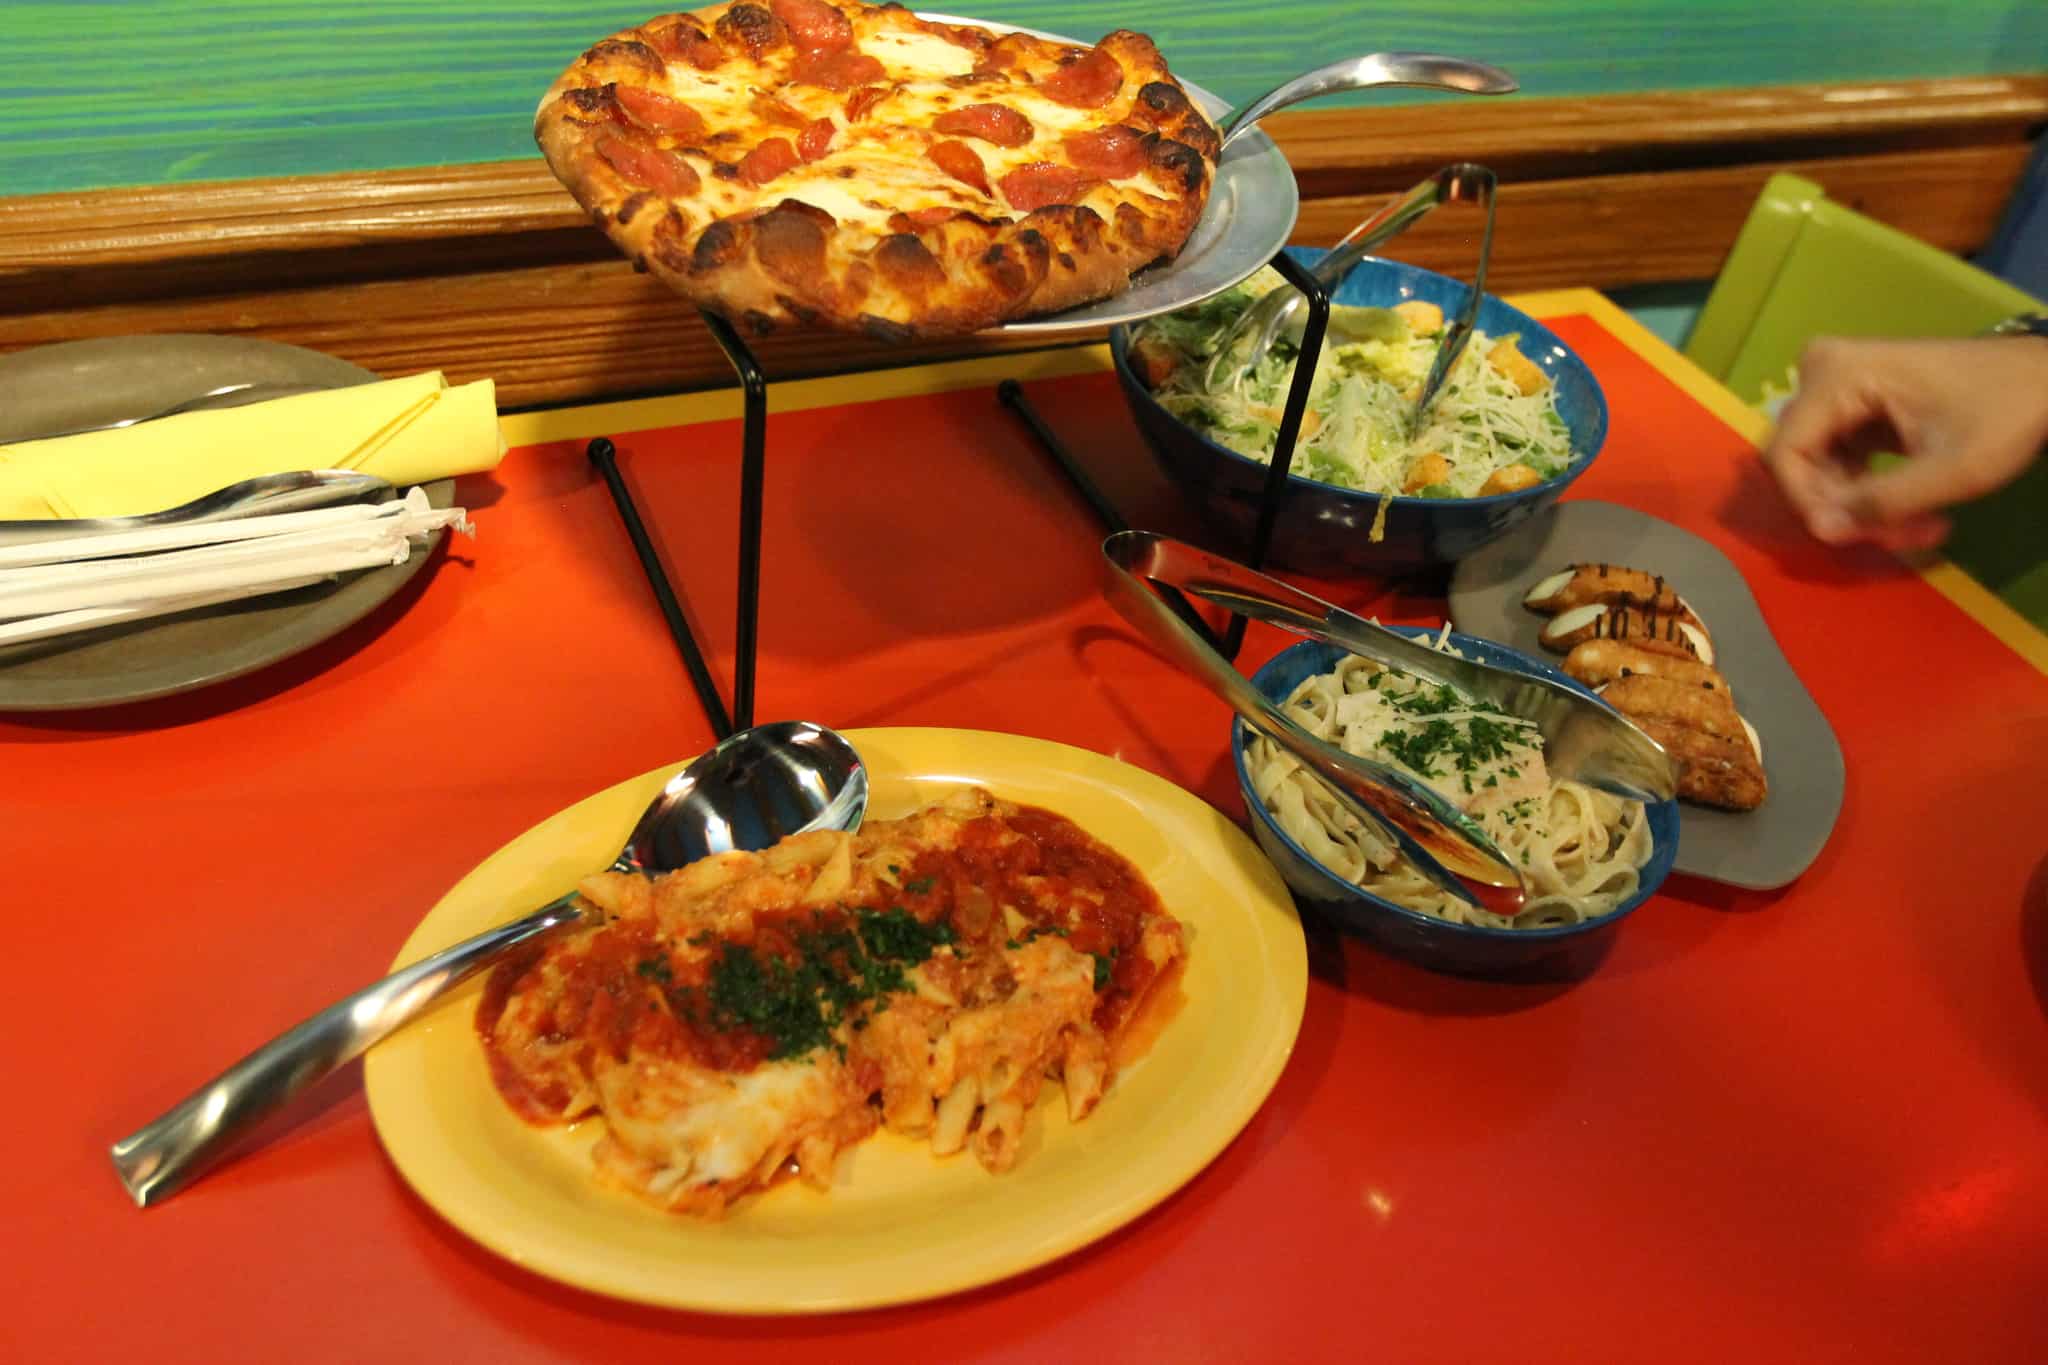 REVIEW: Pizzafari Debuts Family-Style Dining Experience at Disney’s